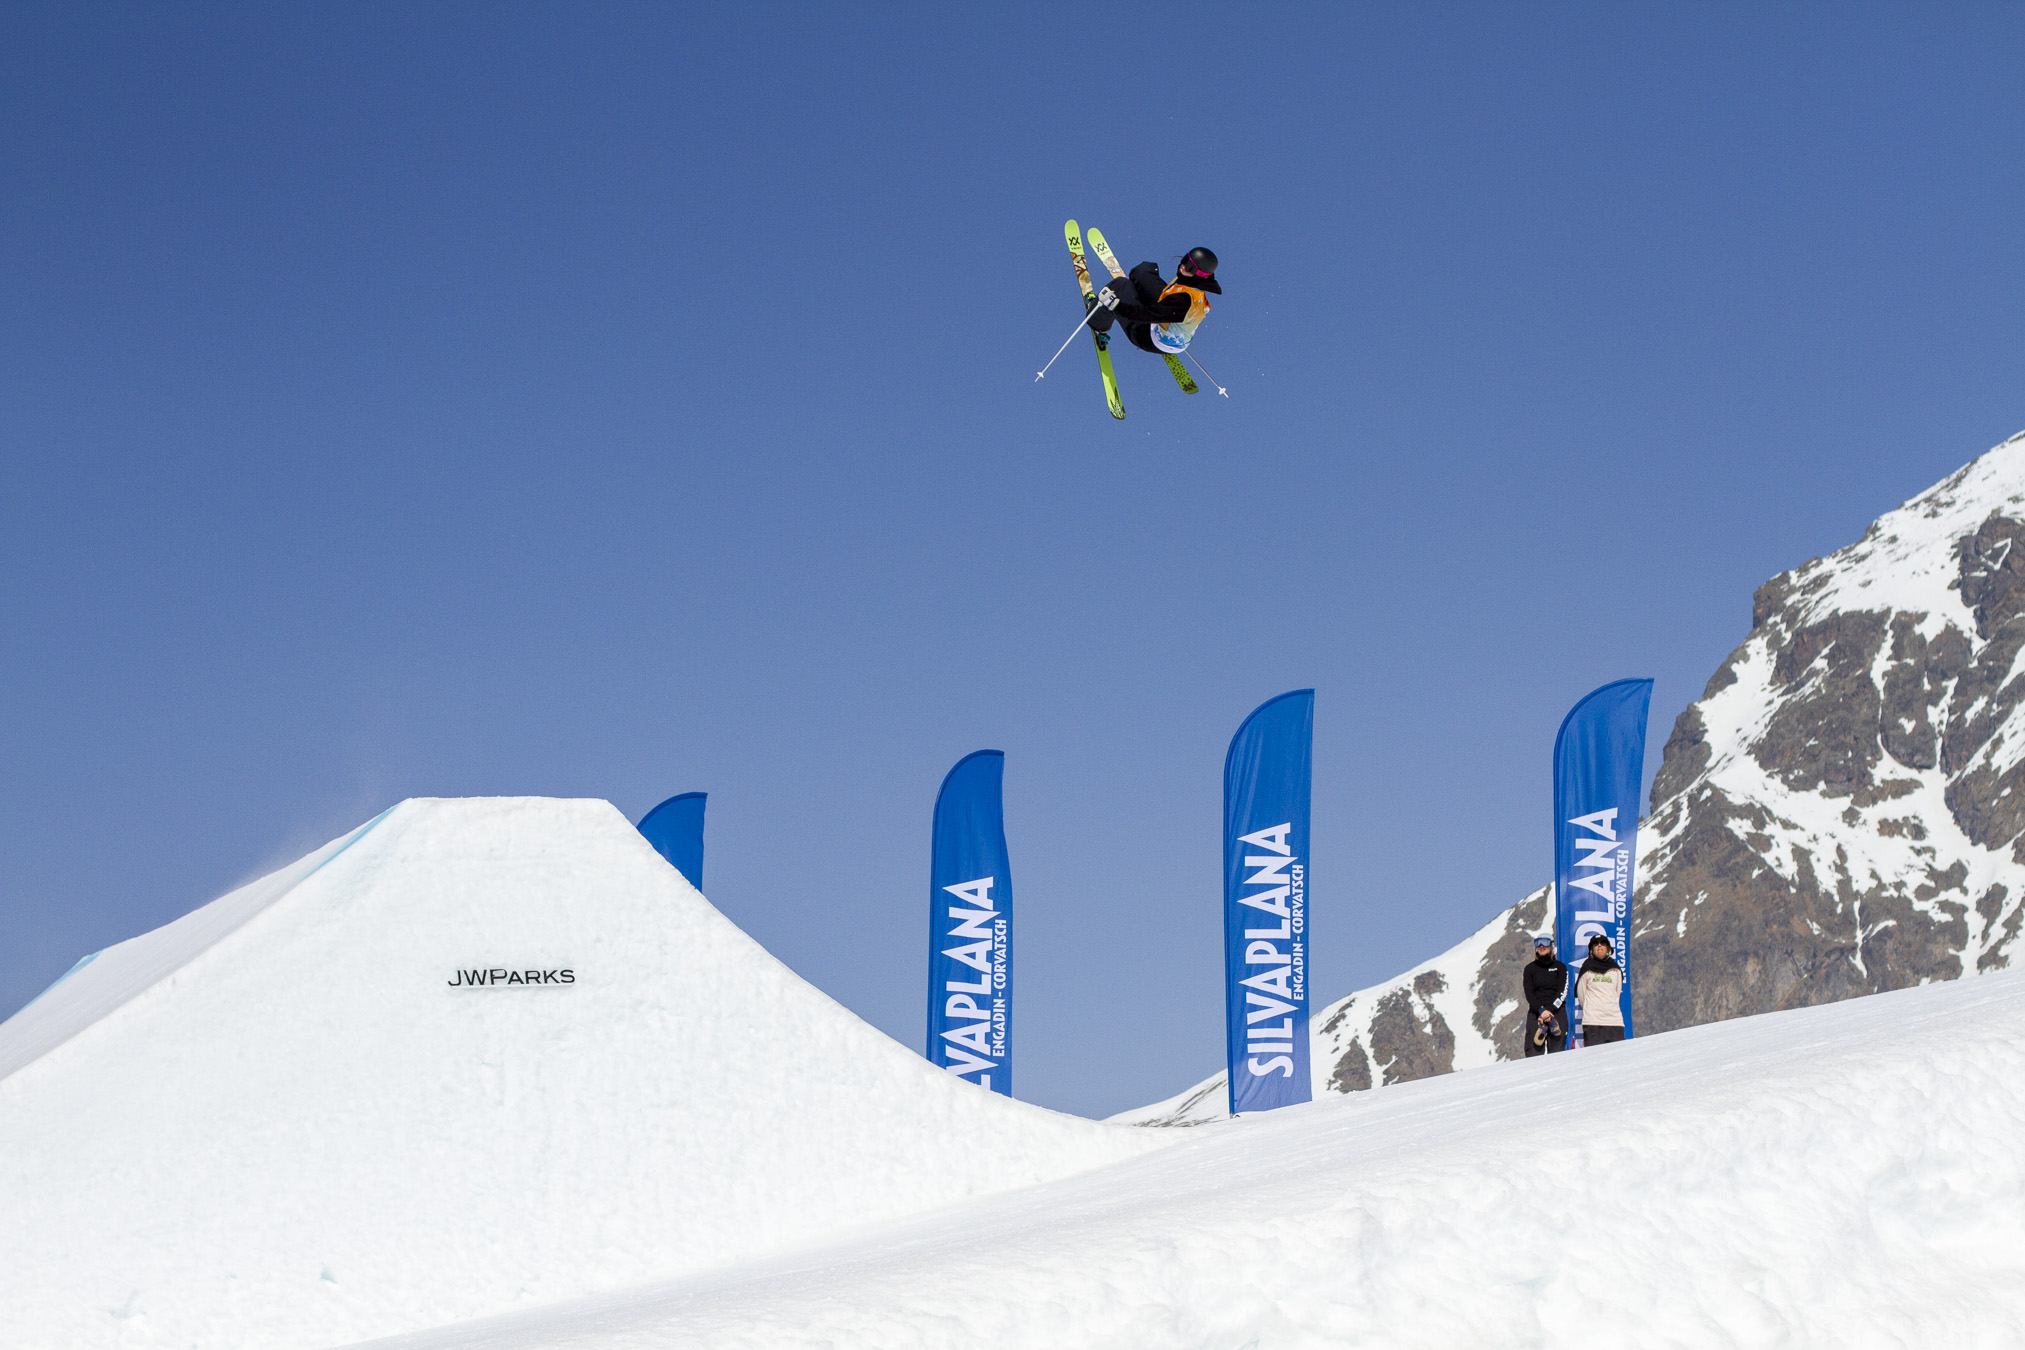 Kirsty Muir competes at the 2022 Freeski World Cup Slopestyle in Corvatsch, Silvaplana, Switzerland